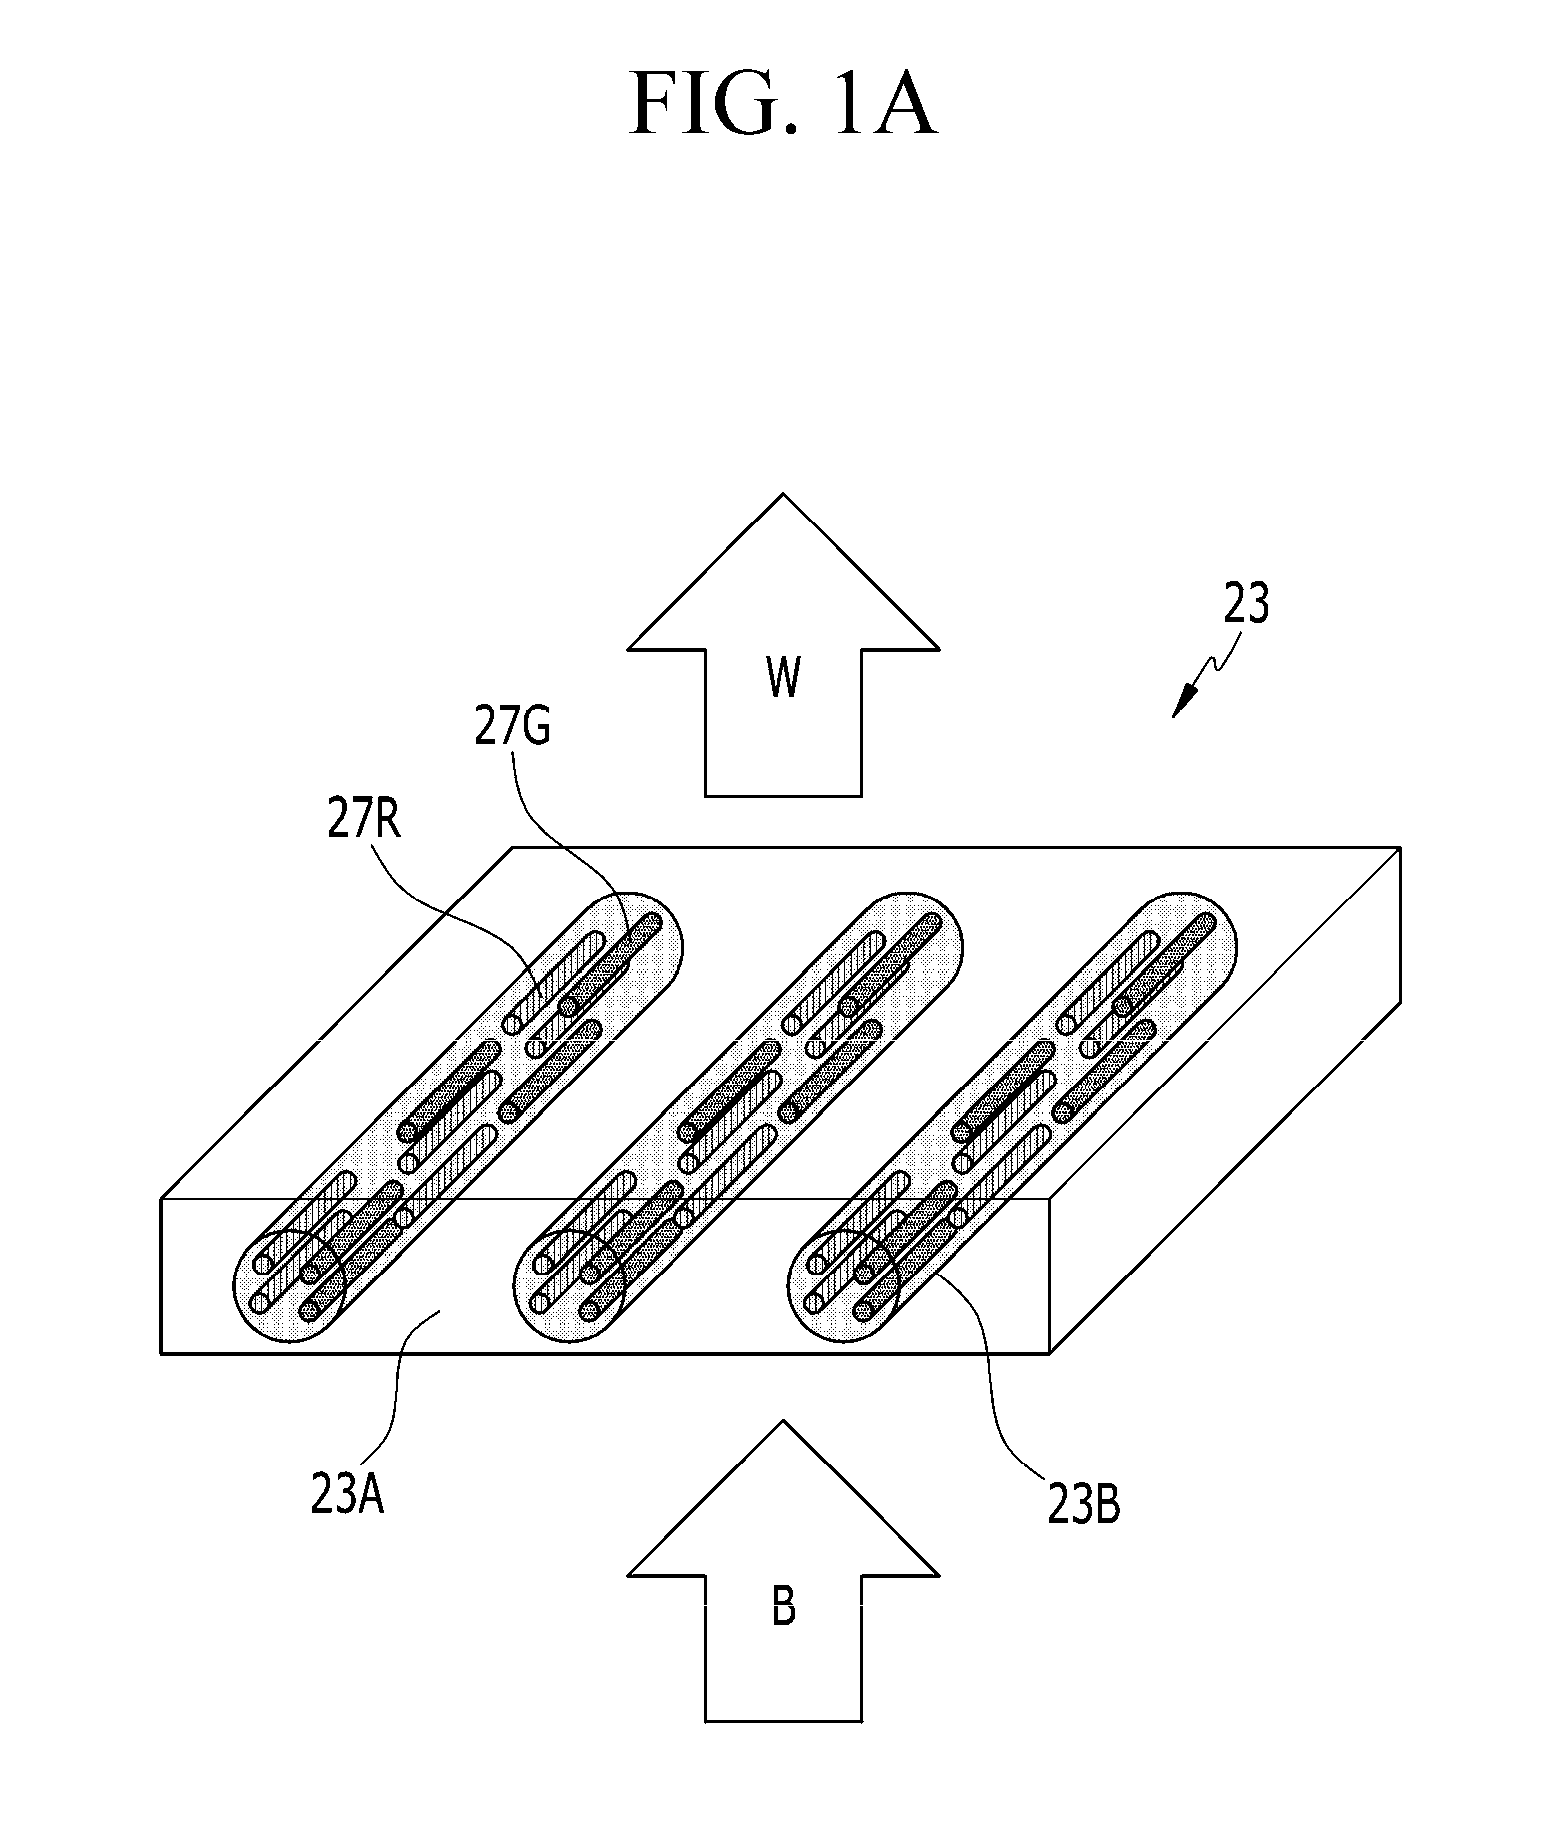 Liquid crystal display having improved color reproduction